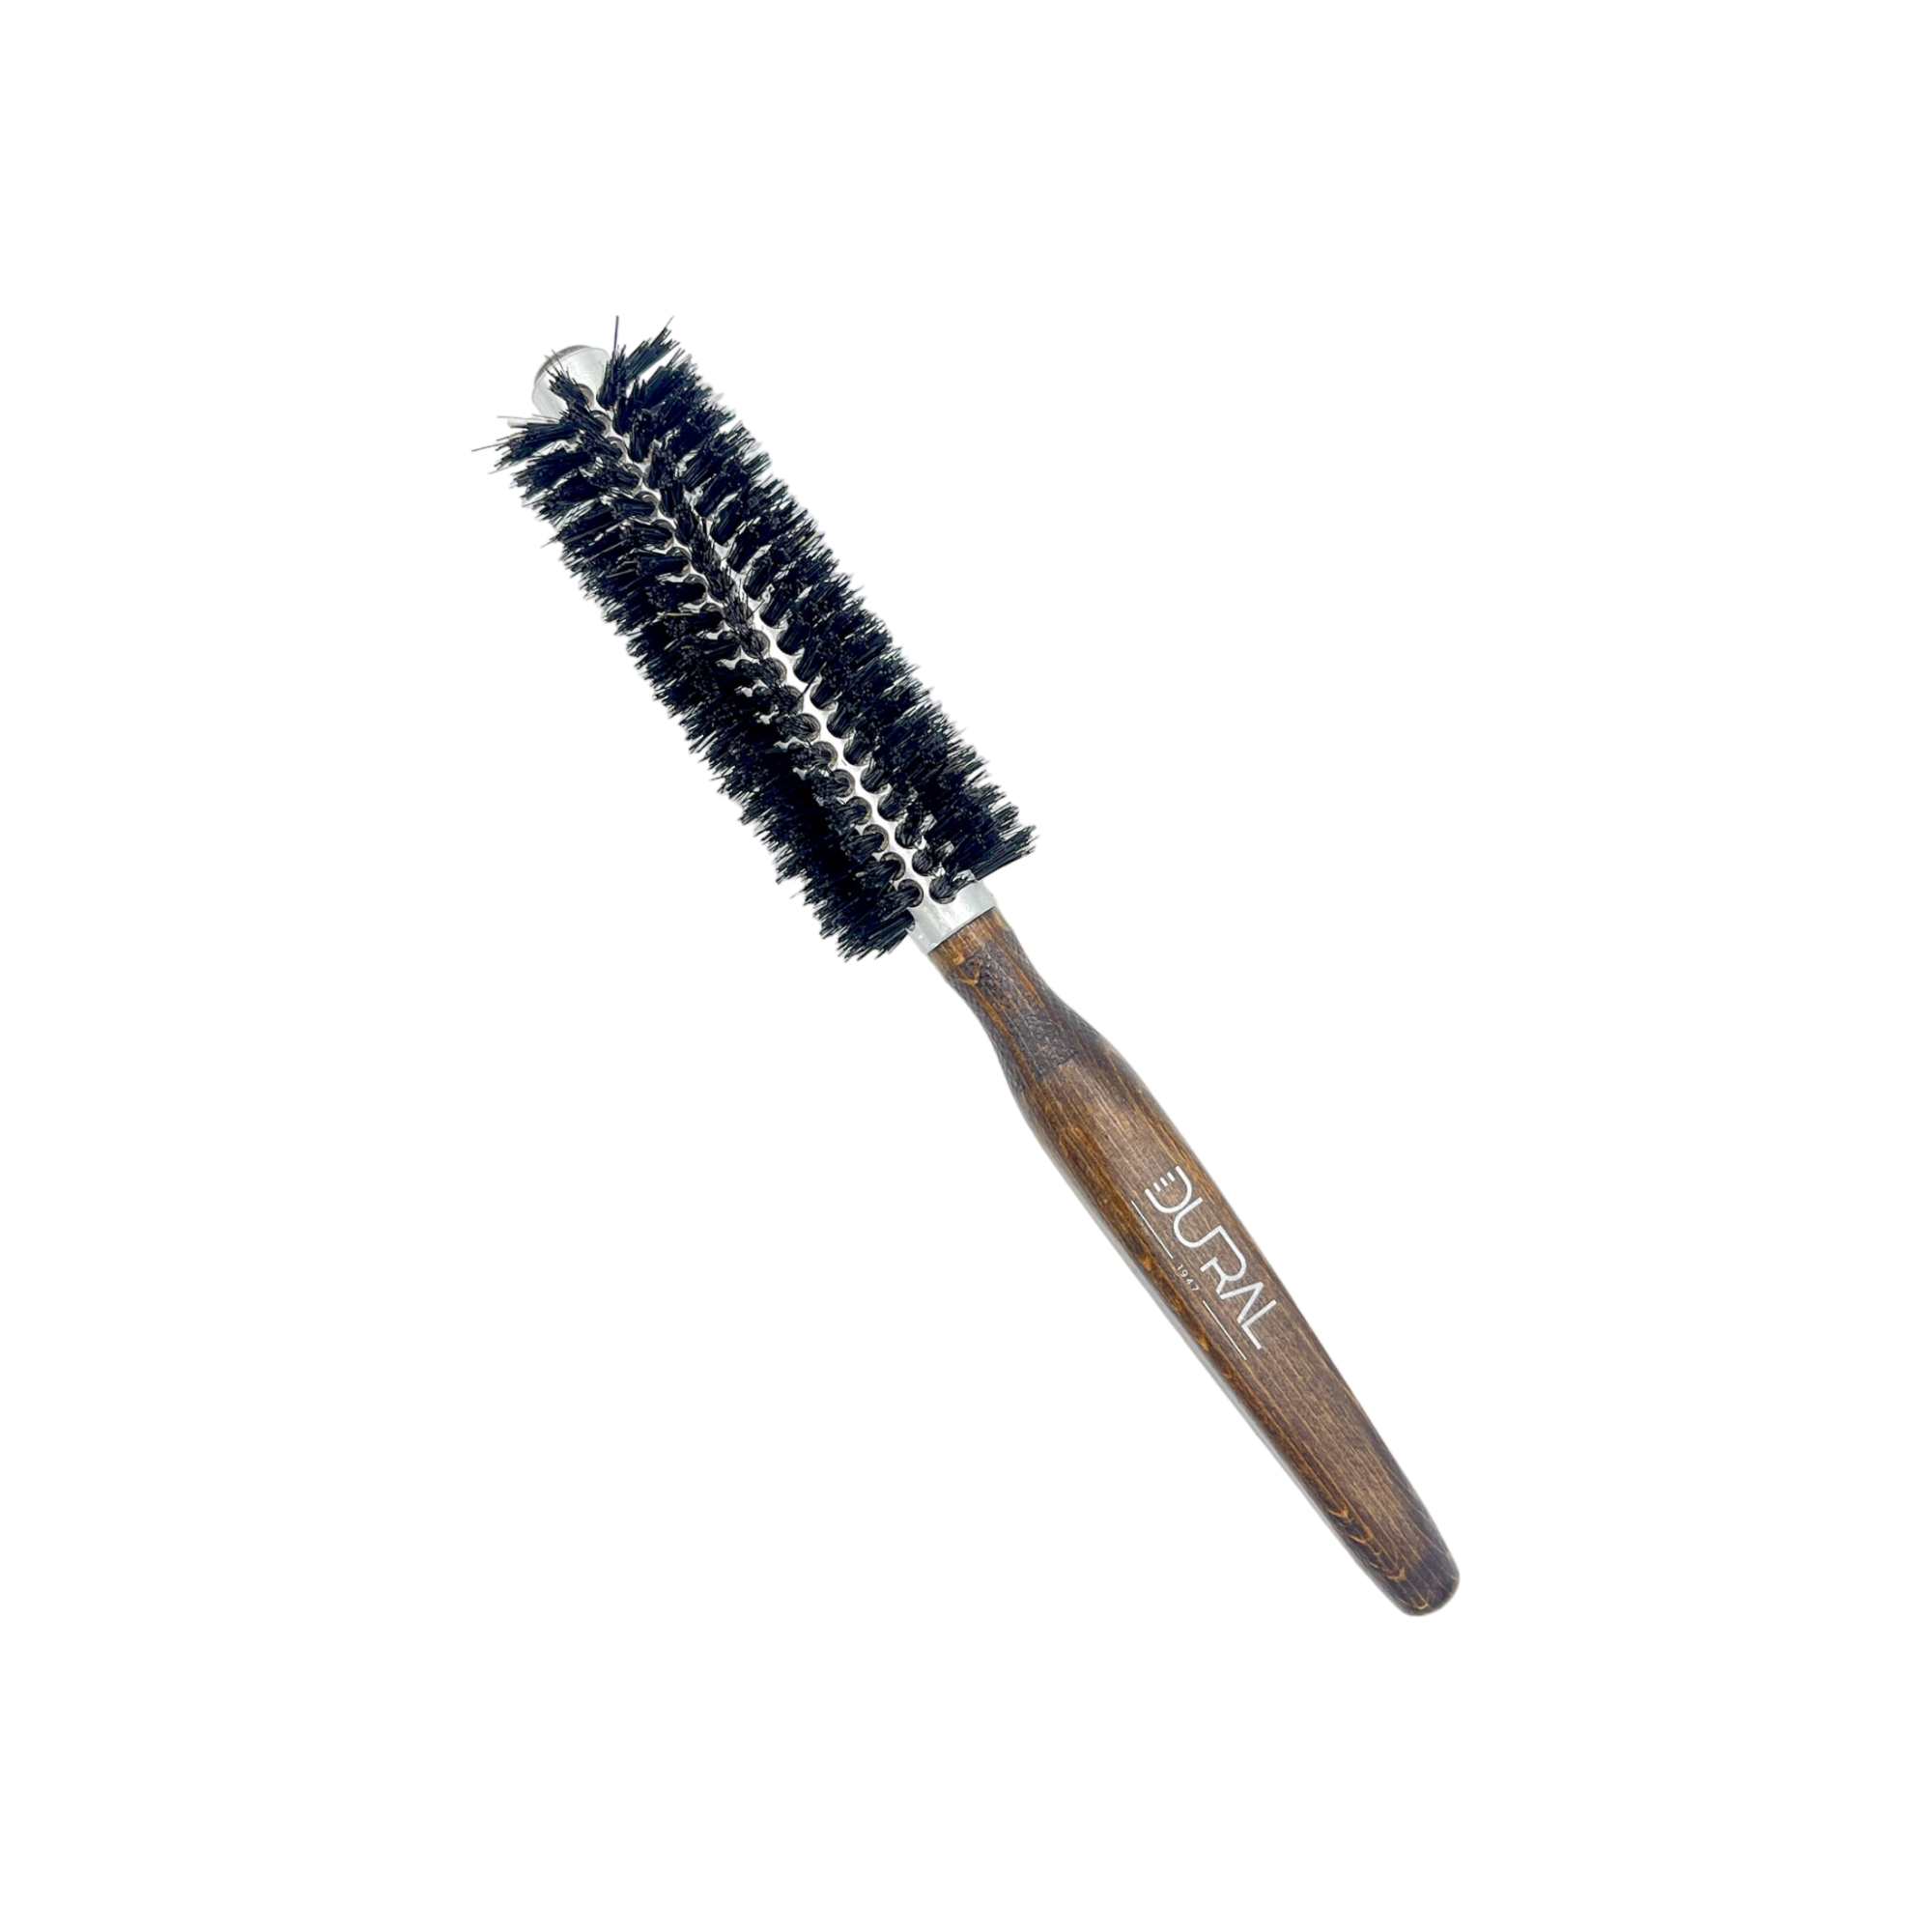 Dural Beech wood quick-styler hair brush with boar bristles - 10 rows